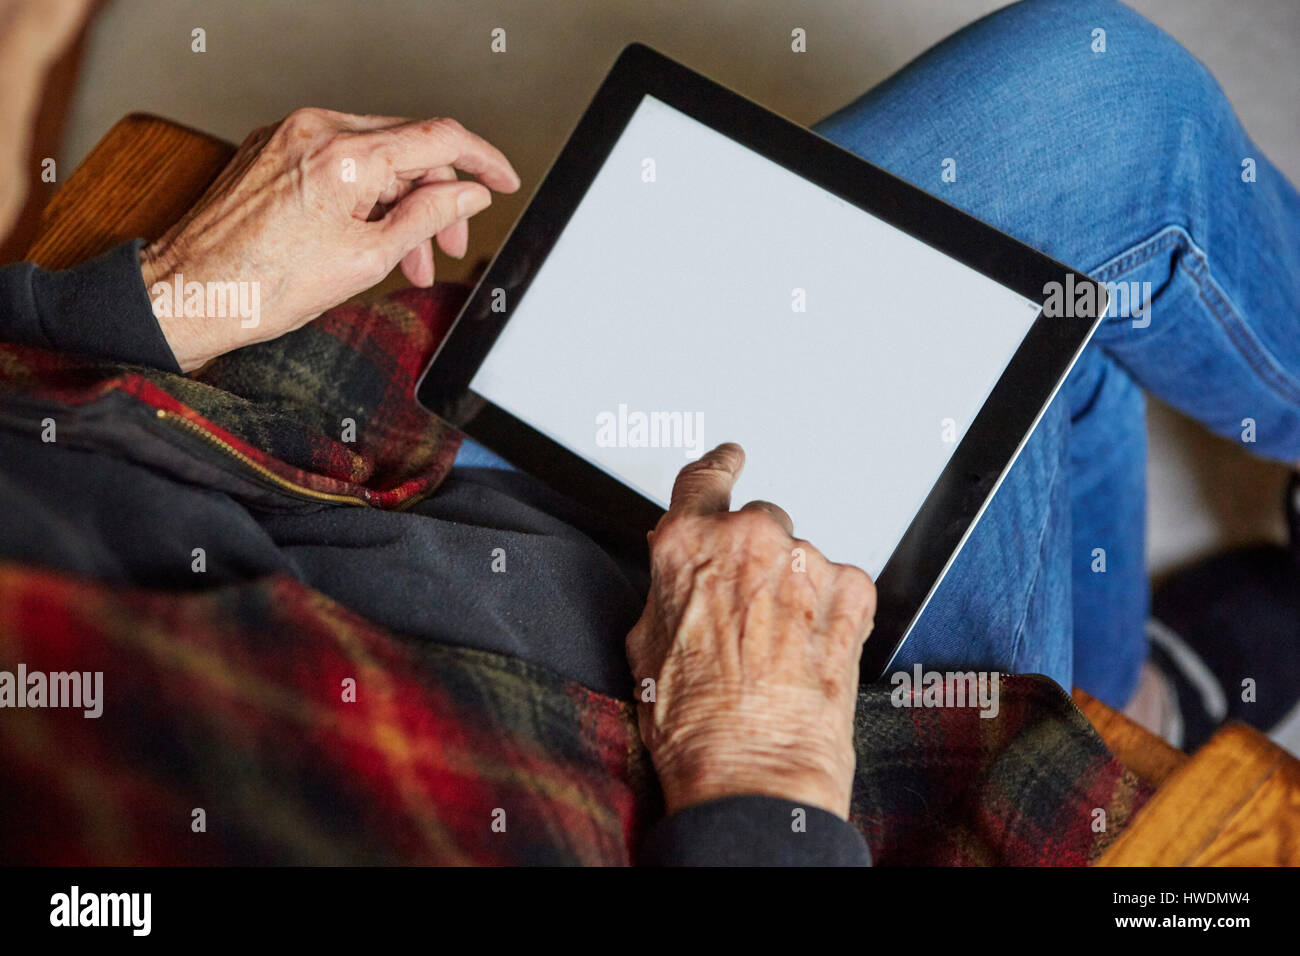 Senior woman sitting in chair, using digital tablet, elevated view Stock Photo